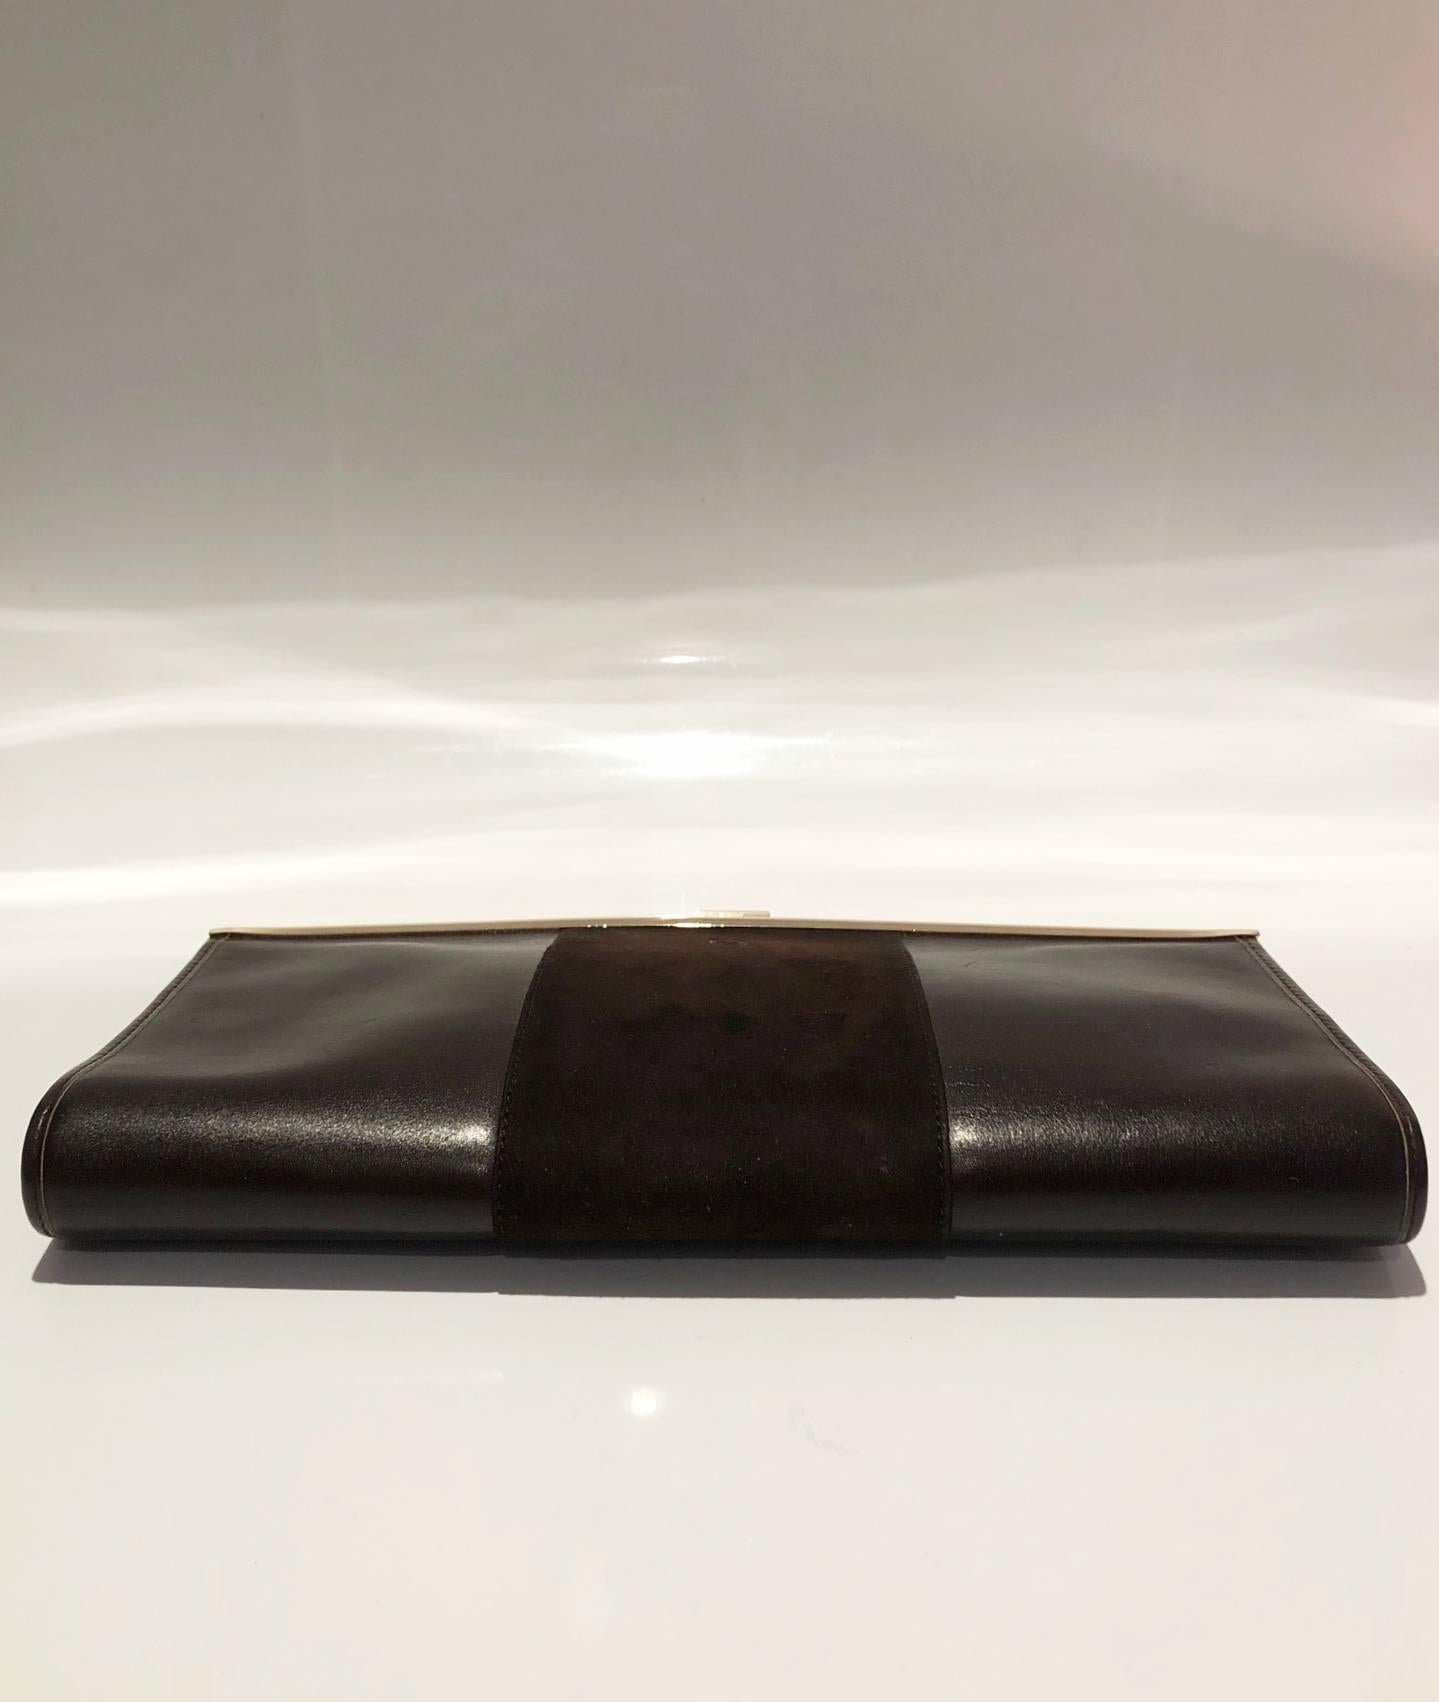 FREE UK and WORLDWIDE DELIVERY 
Christian Dior dark brown envelope clutch bag, gold tone metal ware, suede detailing, Dior logo printed on front top clutch closure, Made in France
Condition: 1970s, excellent, gold ware in immaculate condition